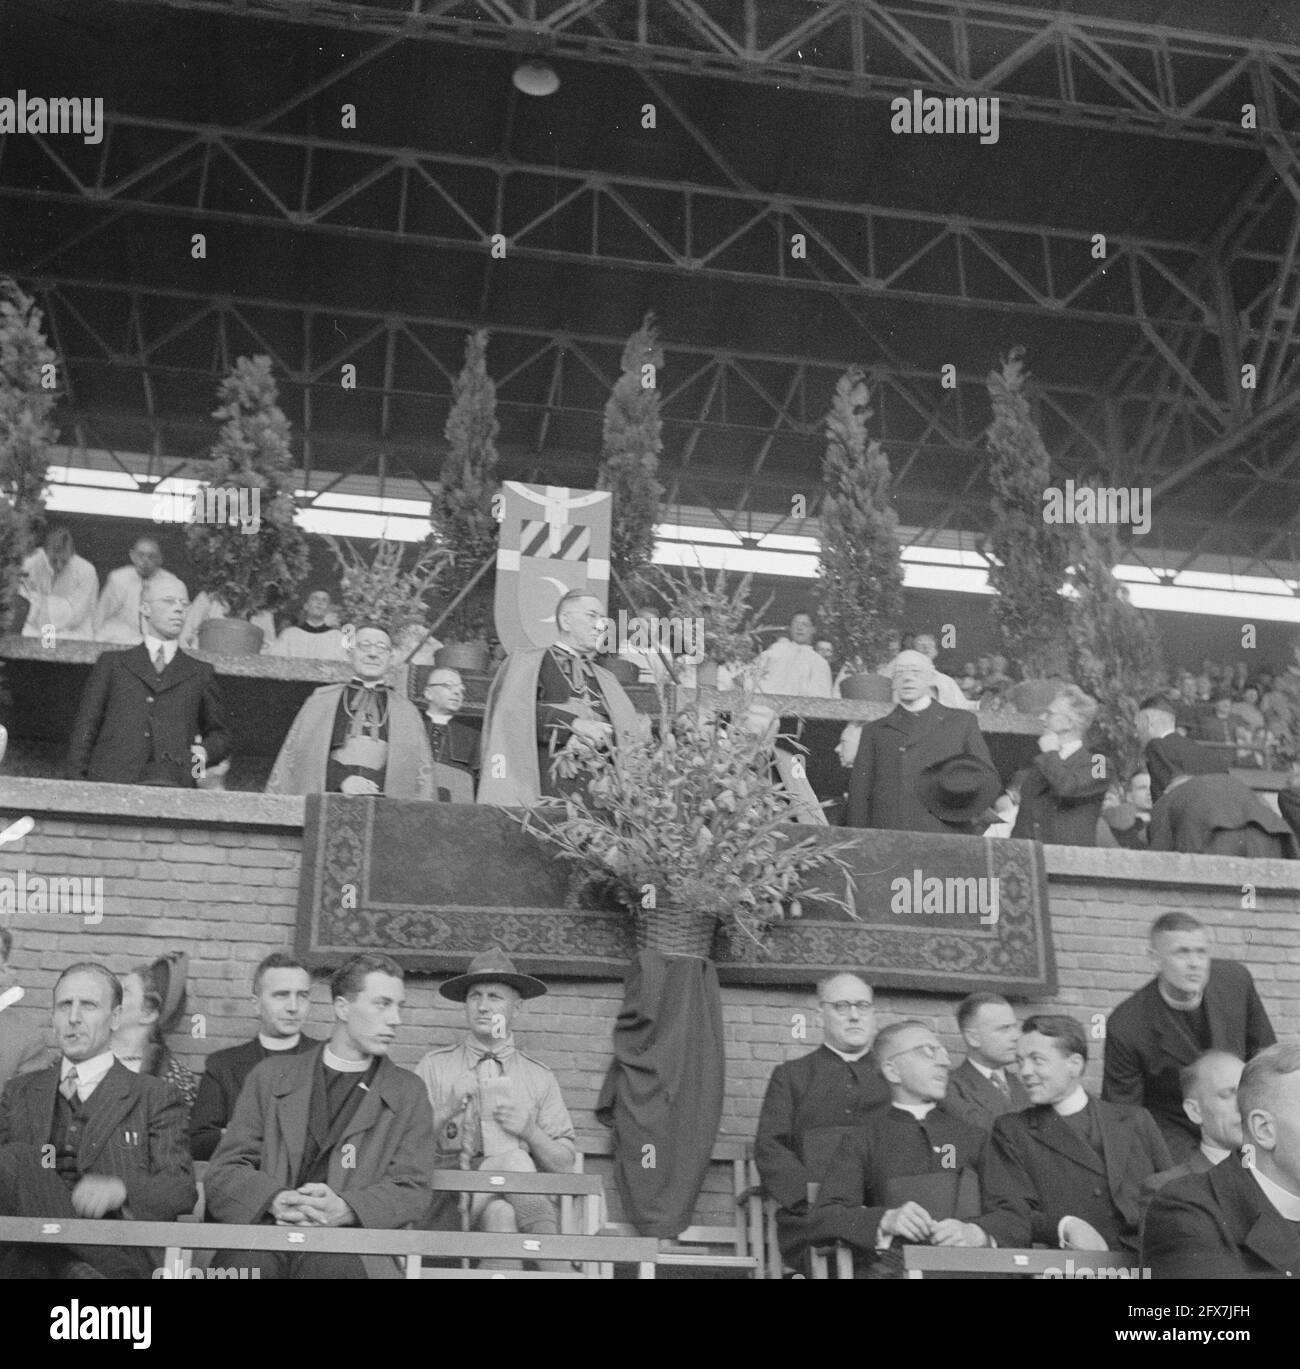 Kayot Congress Olympic Stadium, August 25, 1946, STADION, The Netherlands, 20th century press agency photo, news to remember, documentary, historic photography 1945-1990, visual stories, human history of the Twentieth Century, capturing moments in time Stock Photo